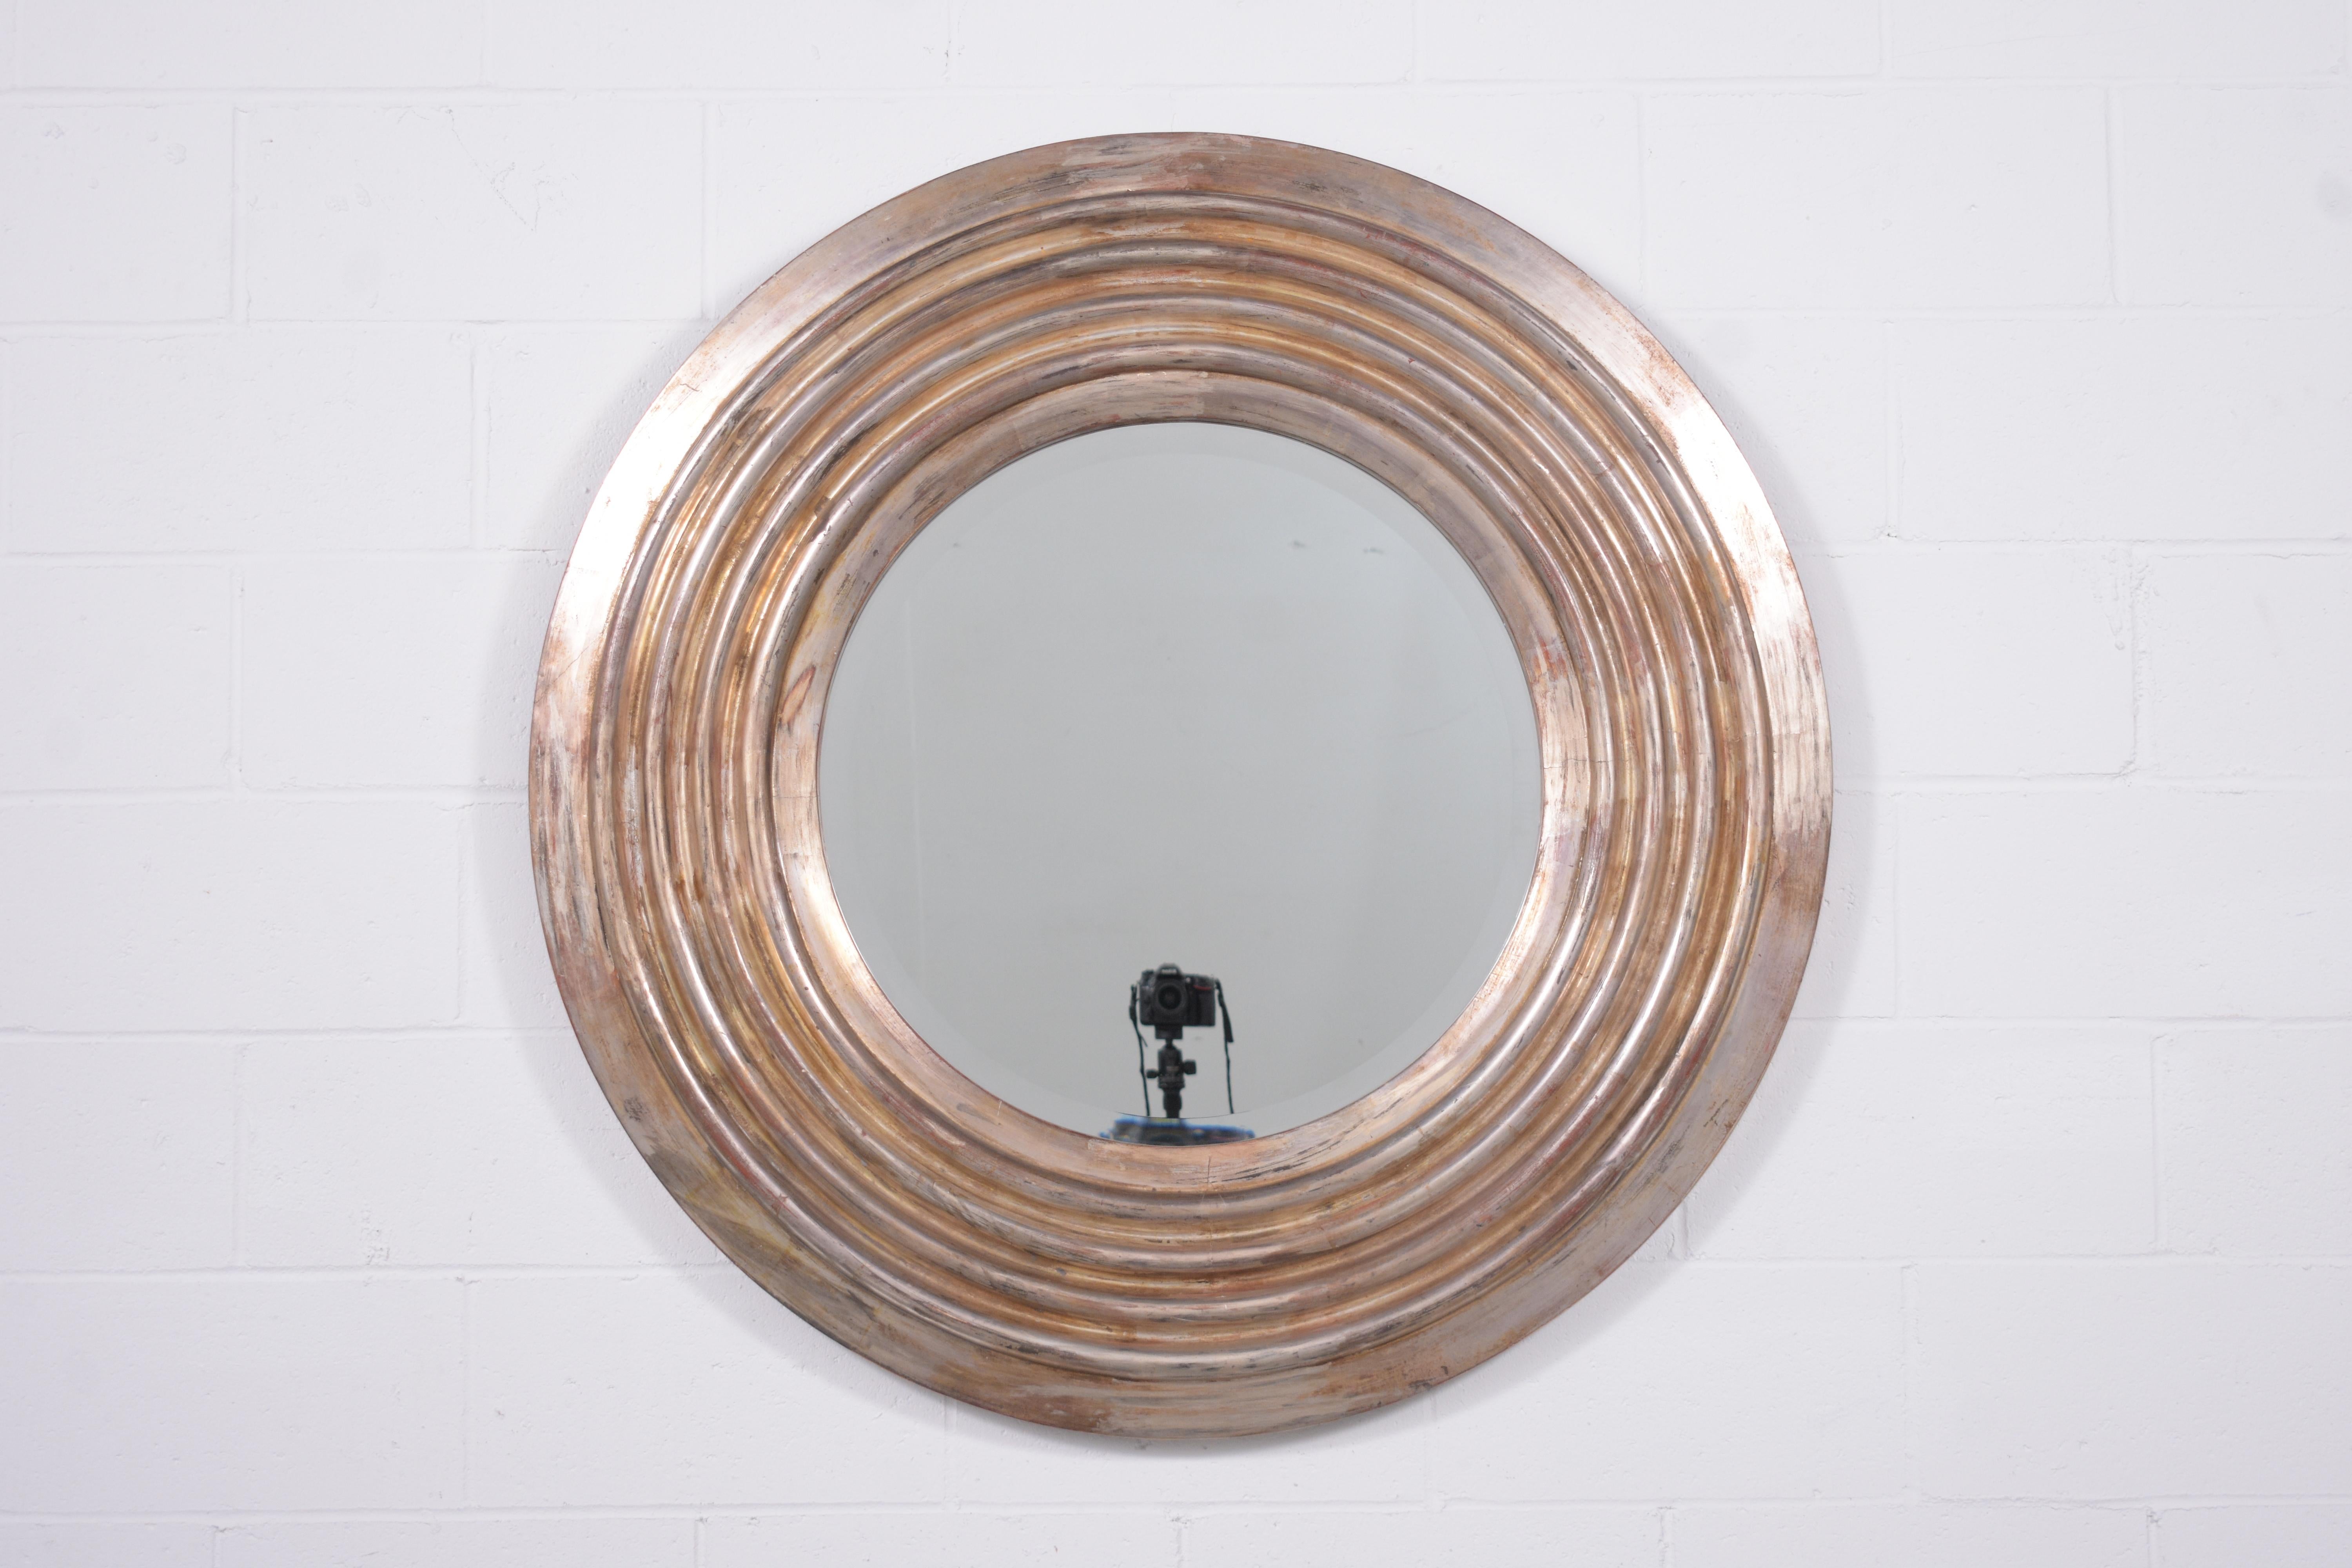 Experience the refinement of Italian artistry with our newly restored Circular Italian Wall Mirror. This piece is a showcase of the exceptional skills of our in-house craftsmen, embodying the elegance and intricate design synonymous with Italian